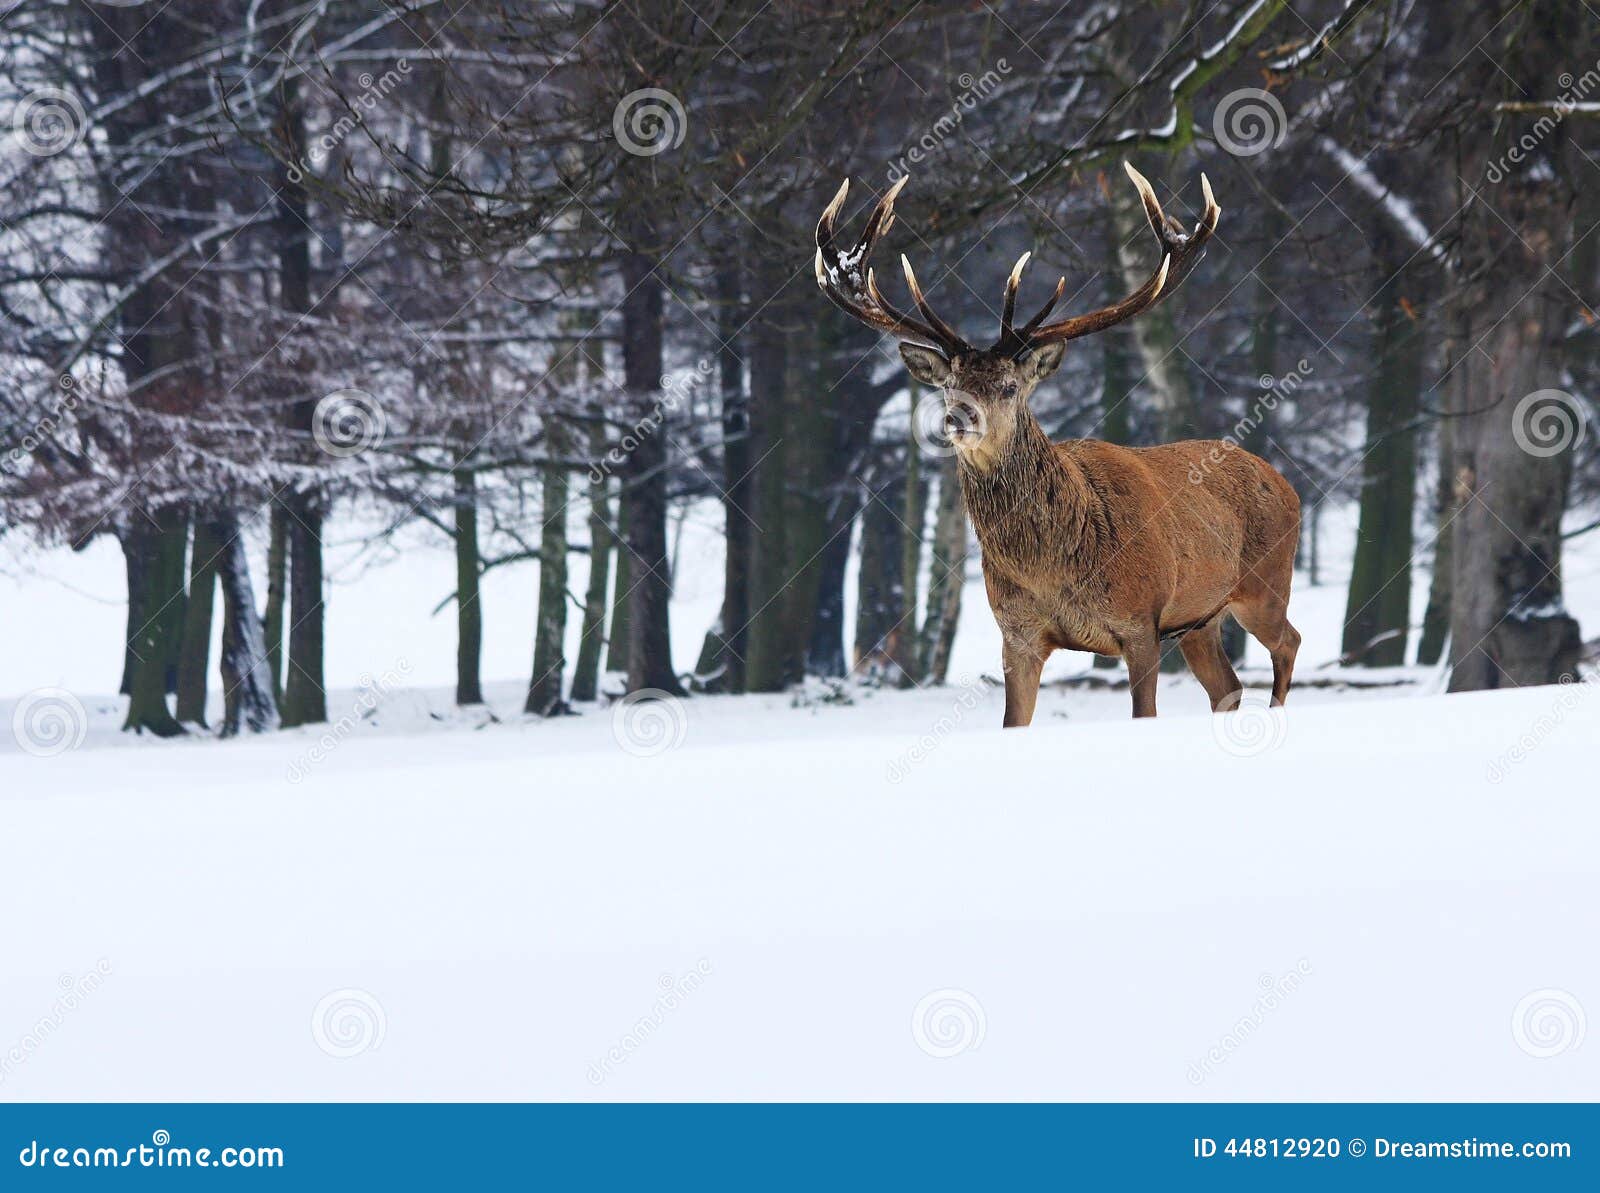 adult male red deer in snow, sherwood forest,nottingham